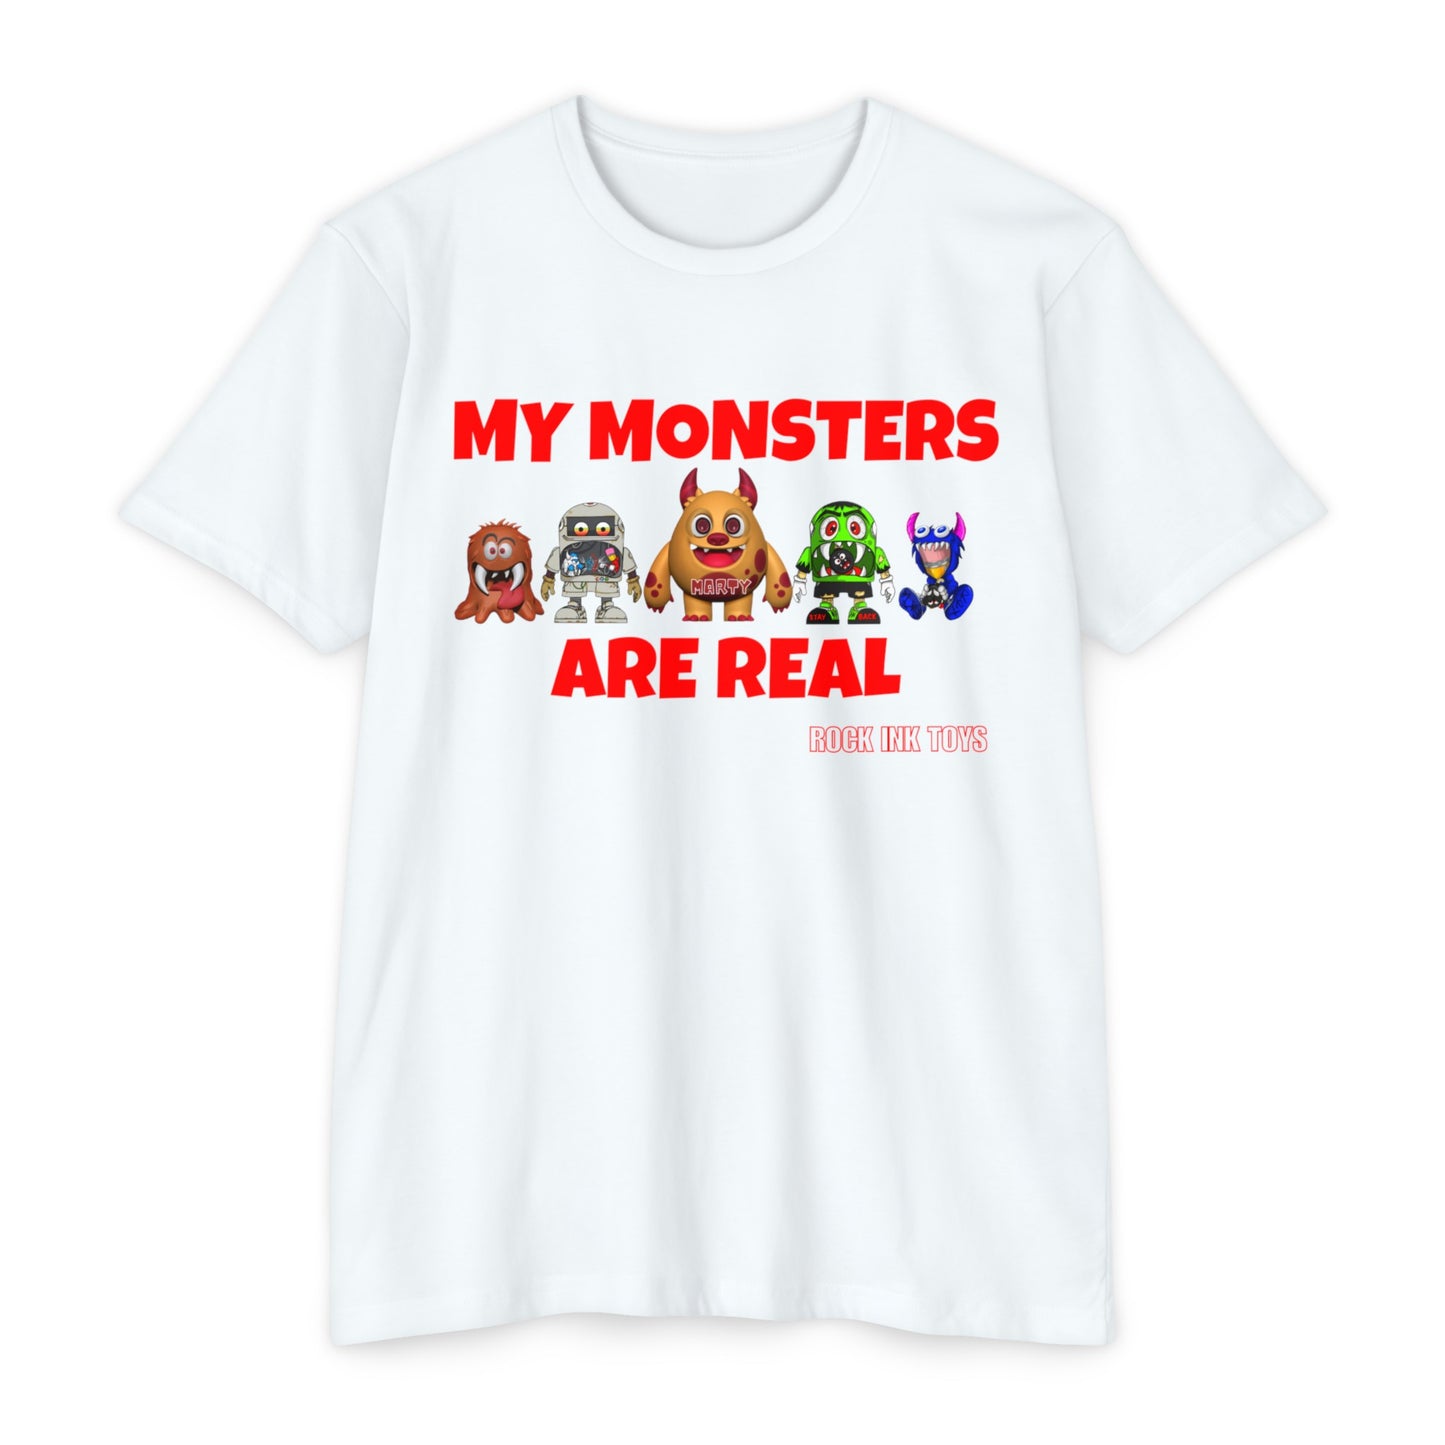 "MY MONSTERS ARE REAL"  T-shirt